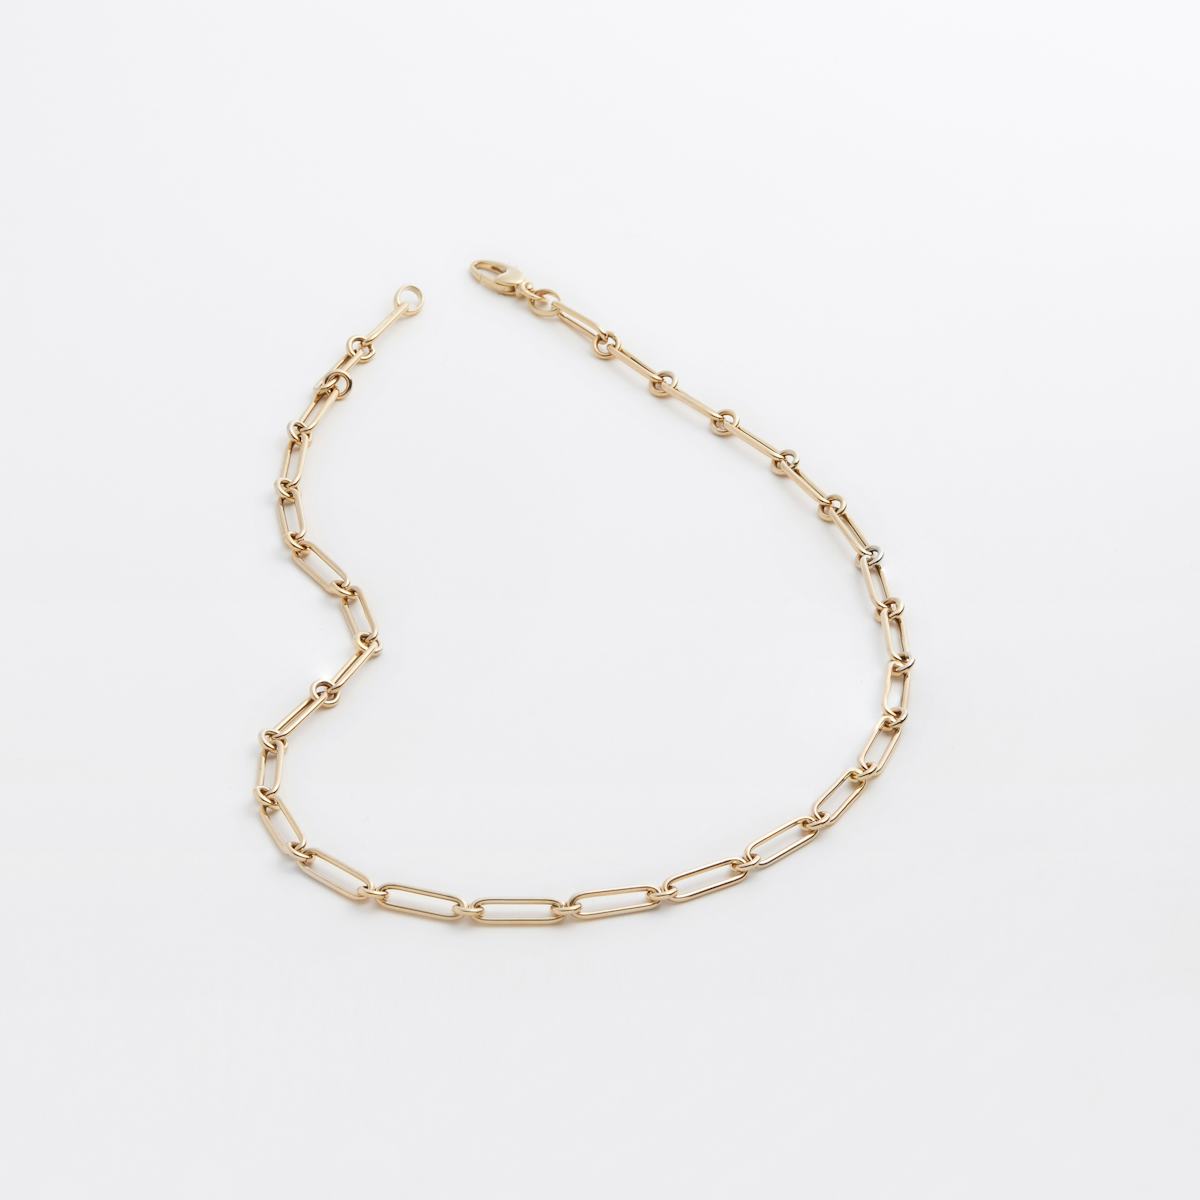 ChainLinkNecklace_Gold_OneSize_Womens_Product_1x1_0038.jpg